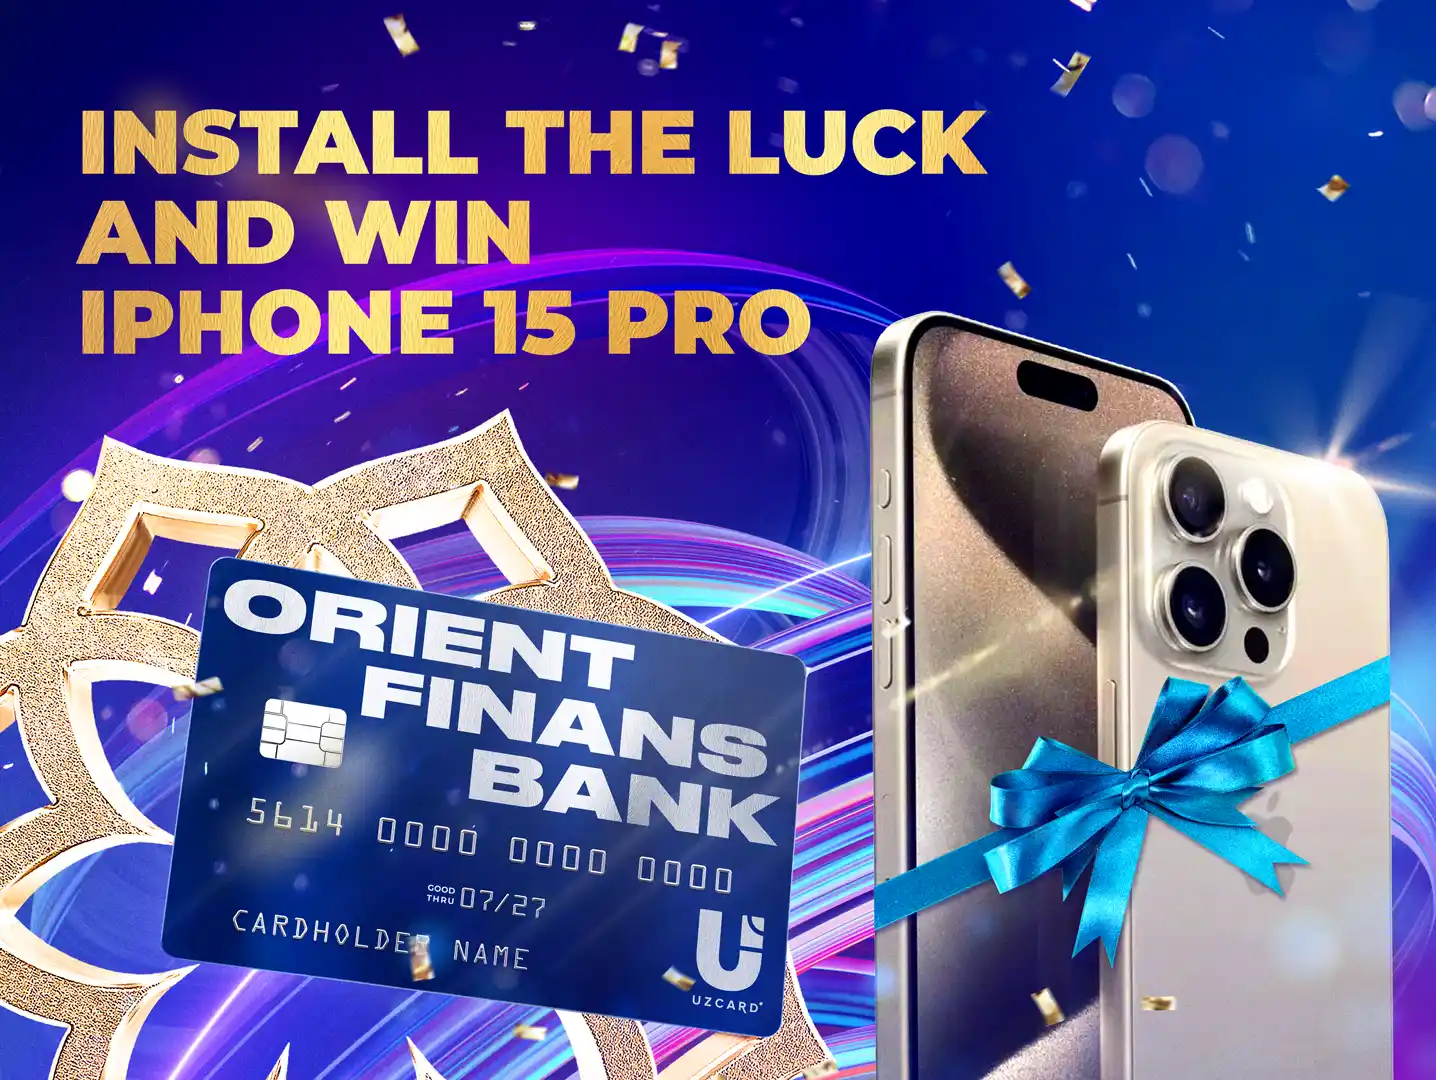 Promo "Install the luck"